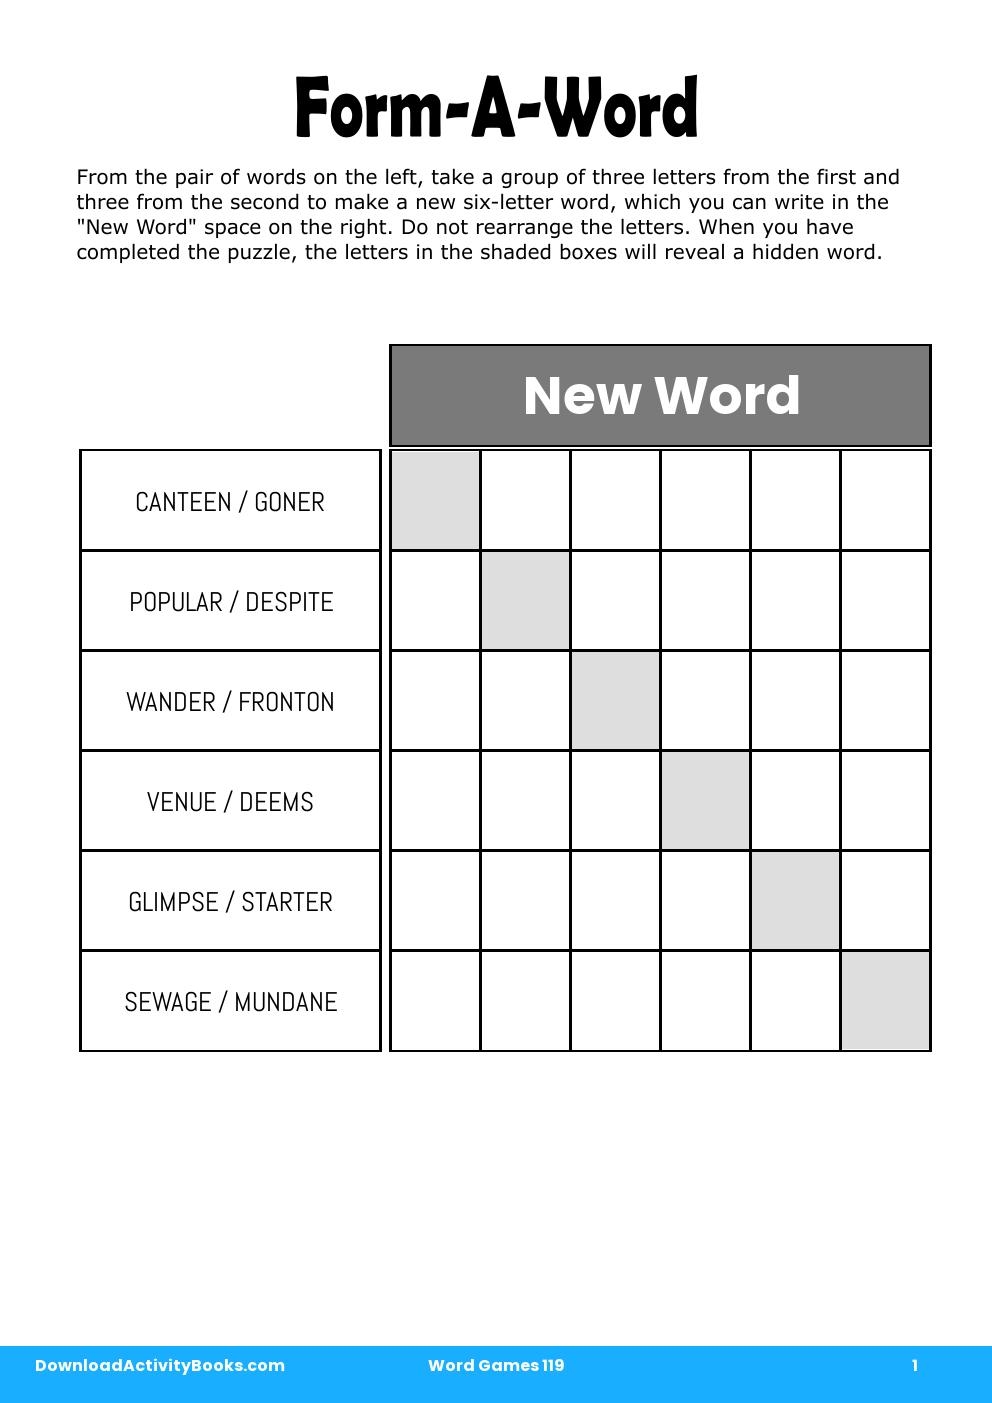 Form-A-Word in Word Games 119